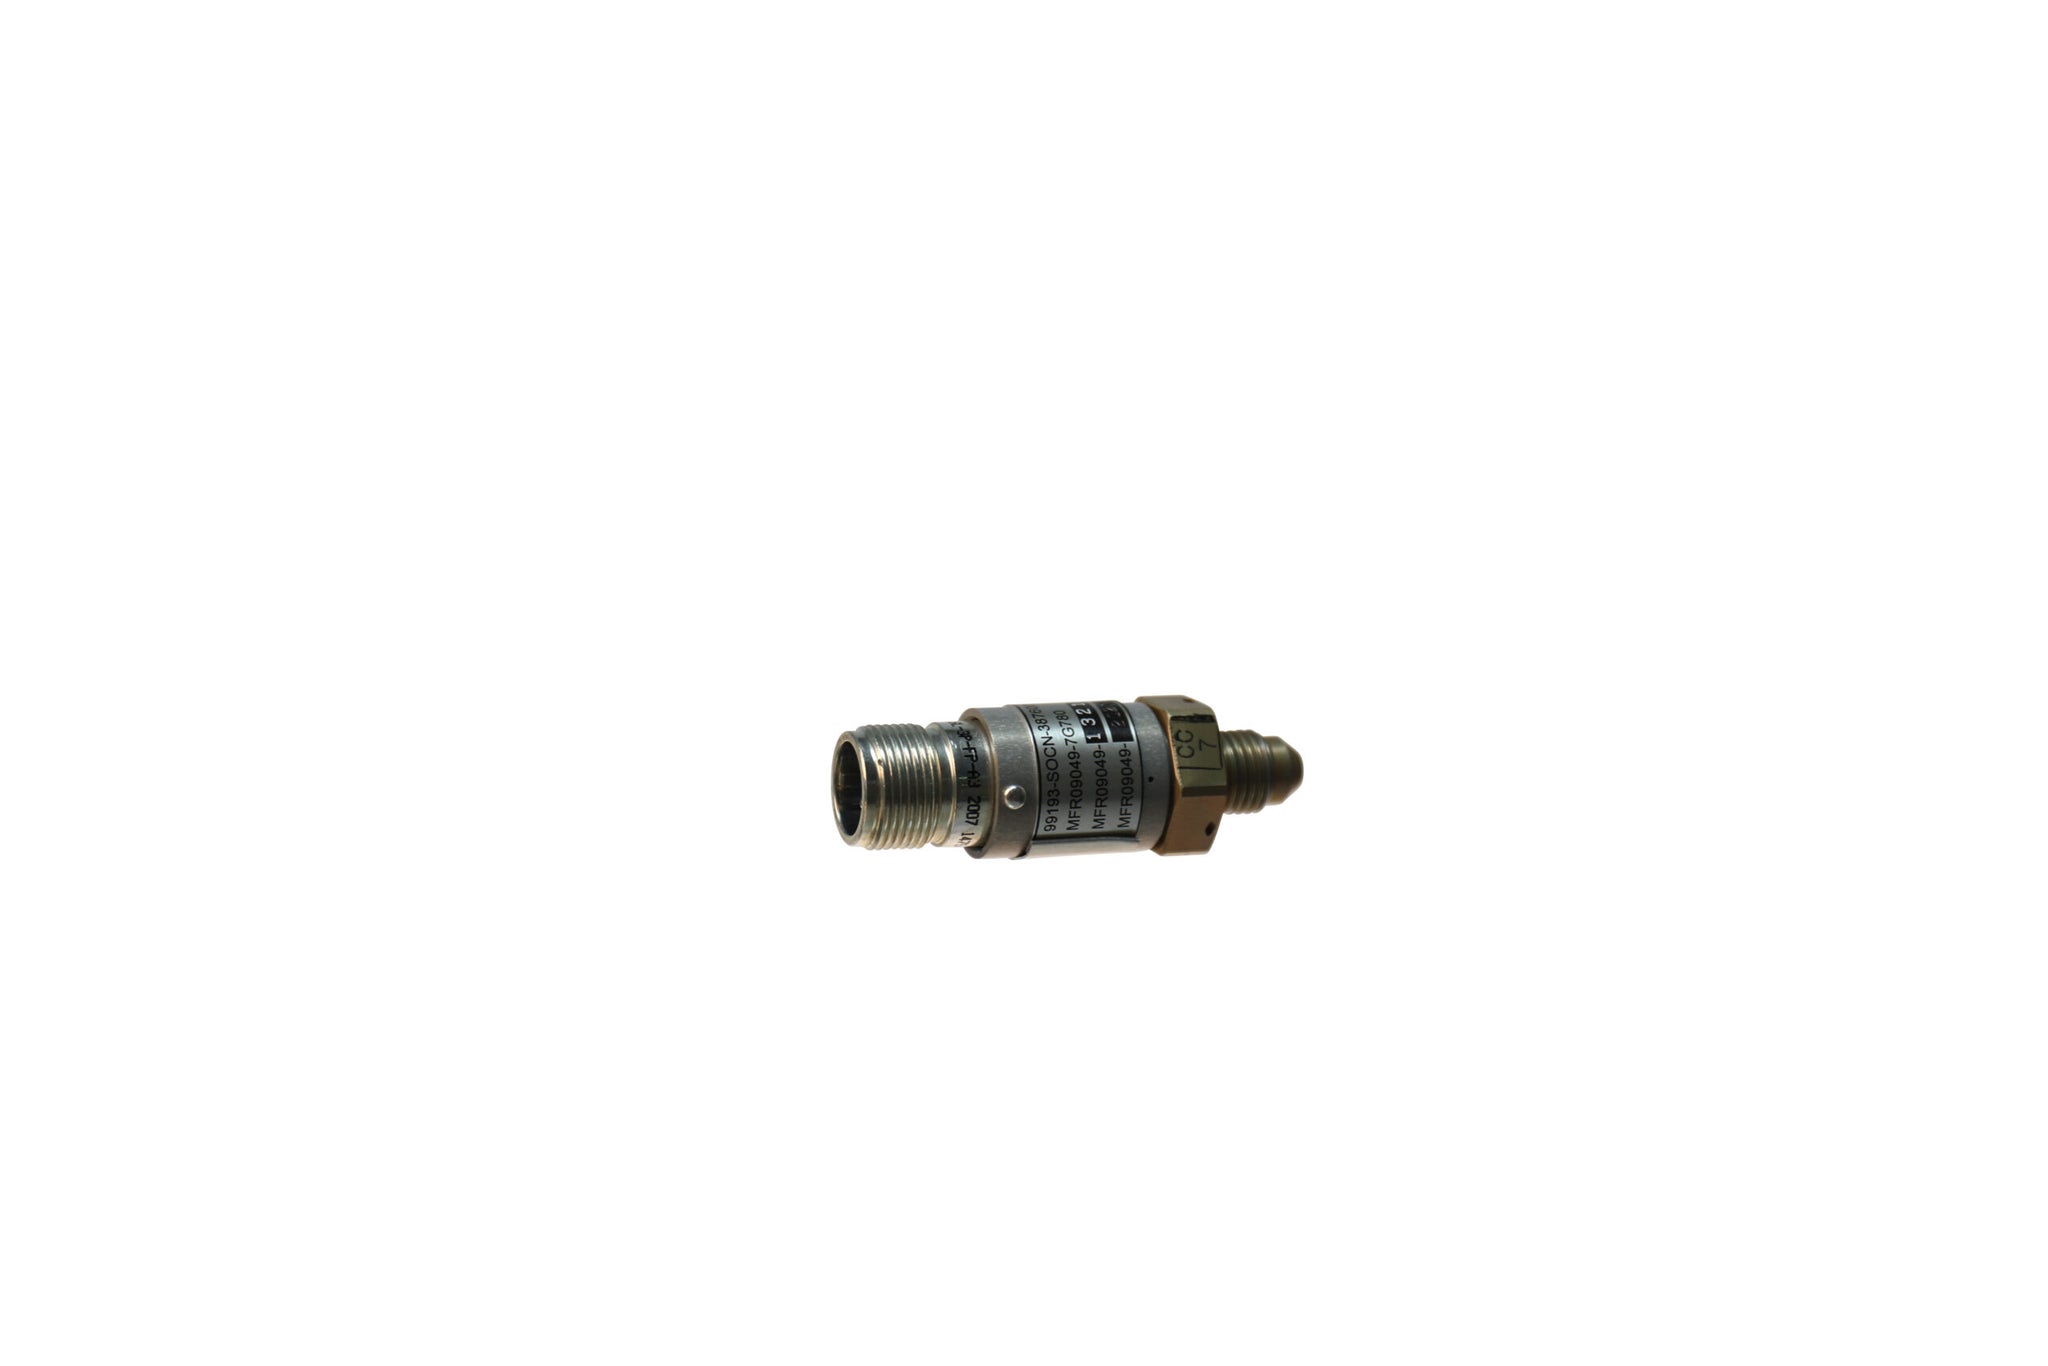 3876001-6, Low Oil Pressure Switch